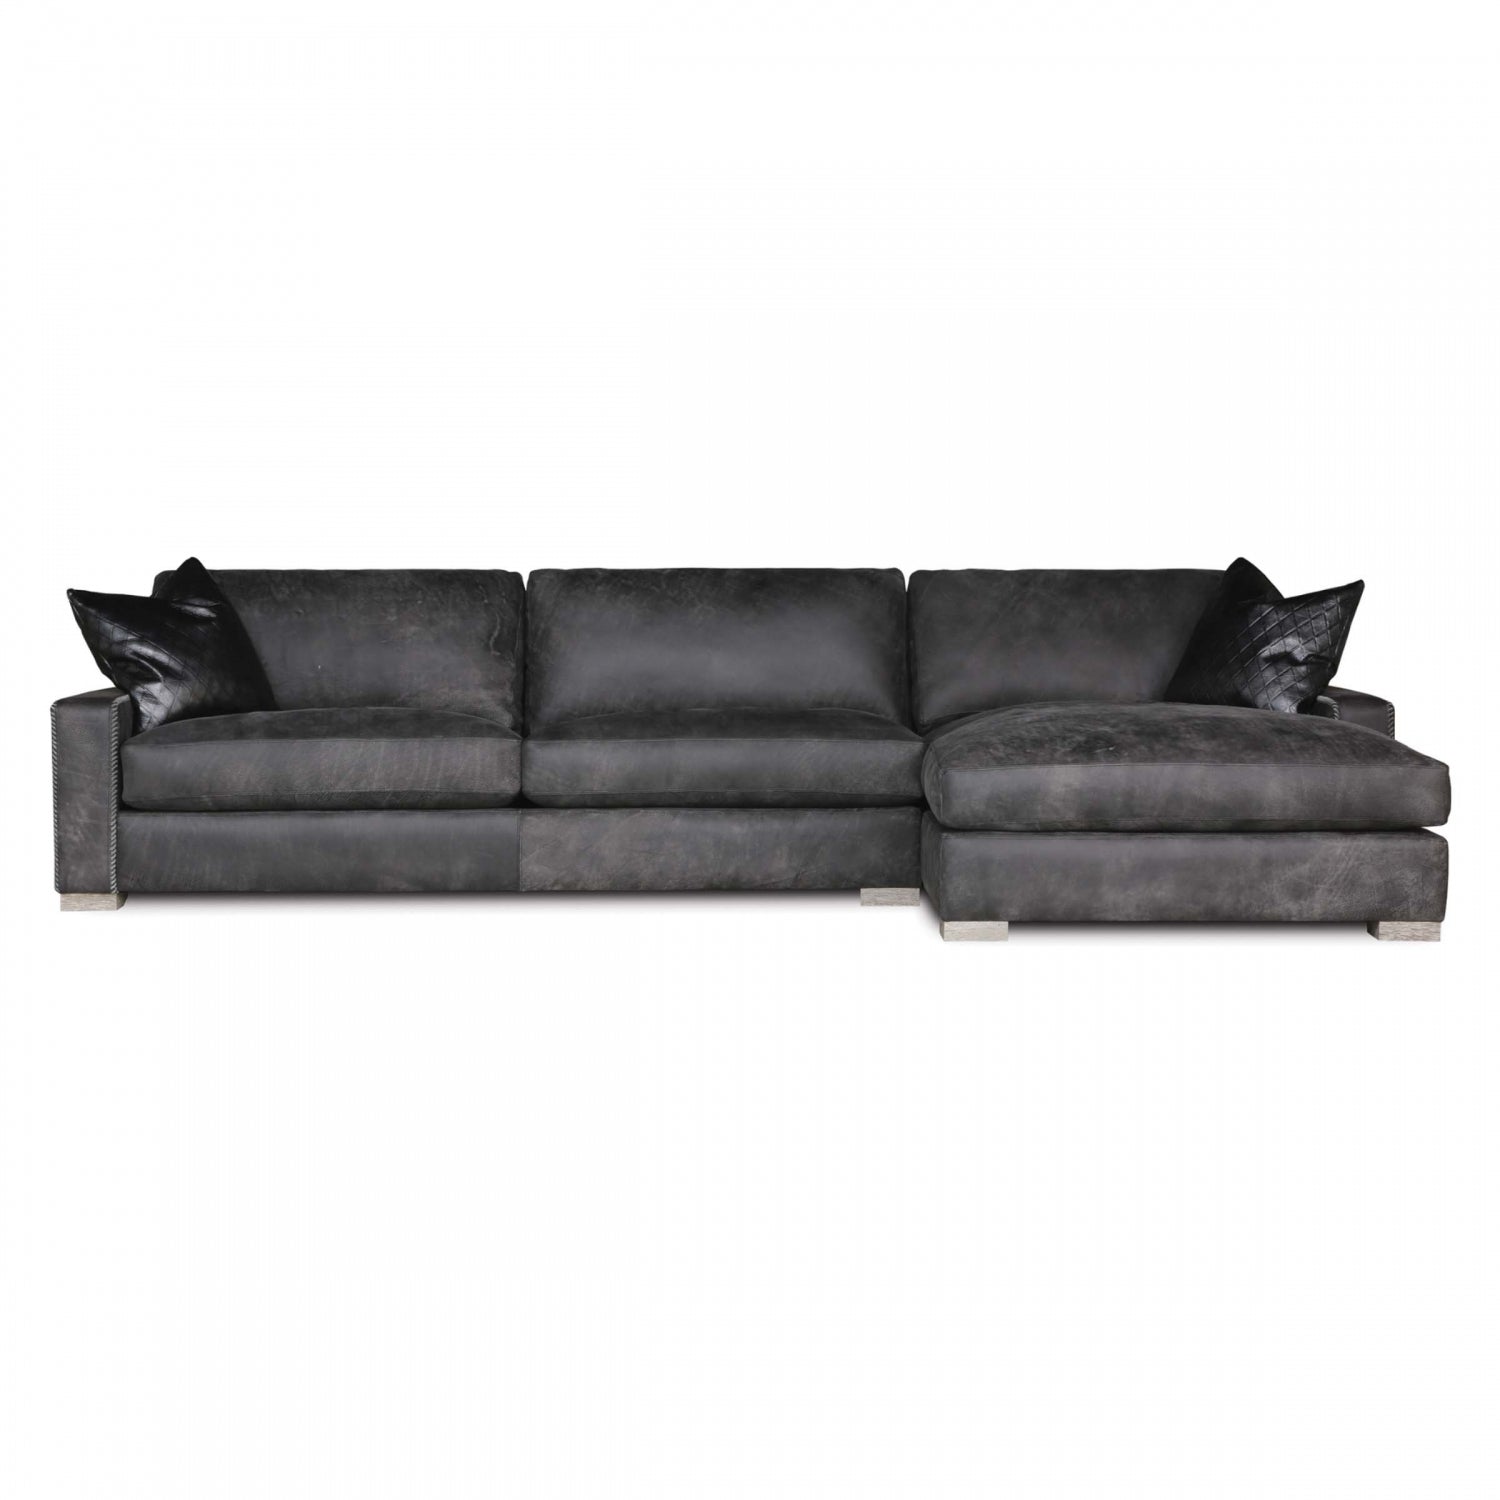 Eleanor Rigby Uptown Cowboy Sectional (Sofa + Chaise)